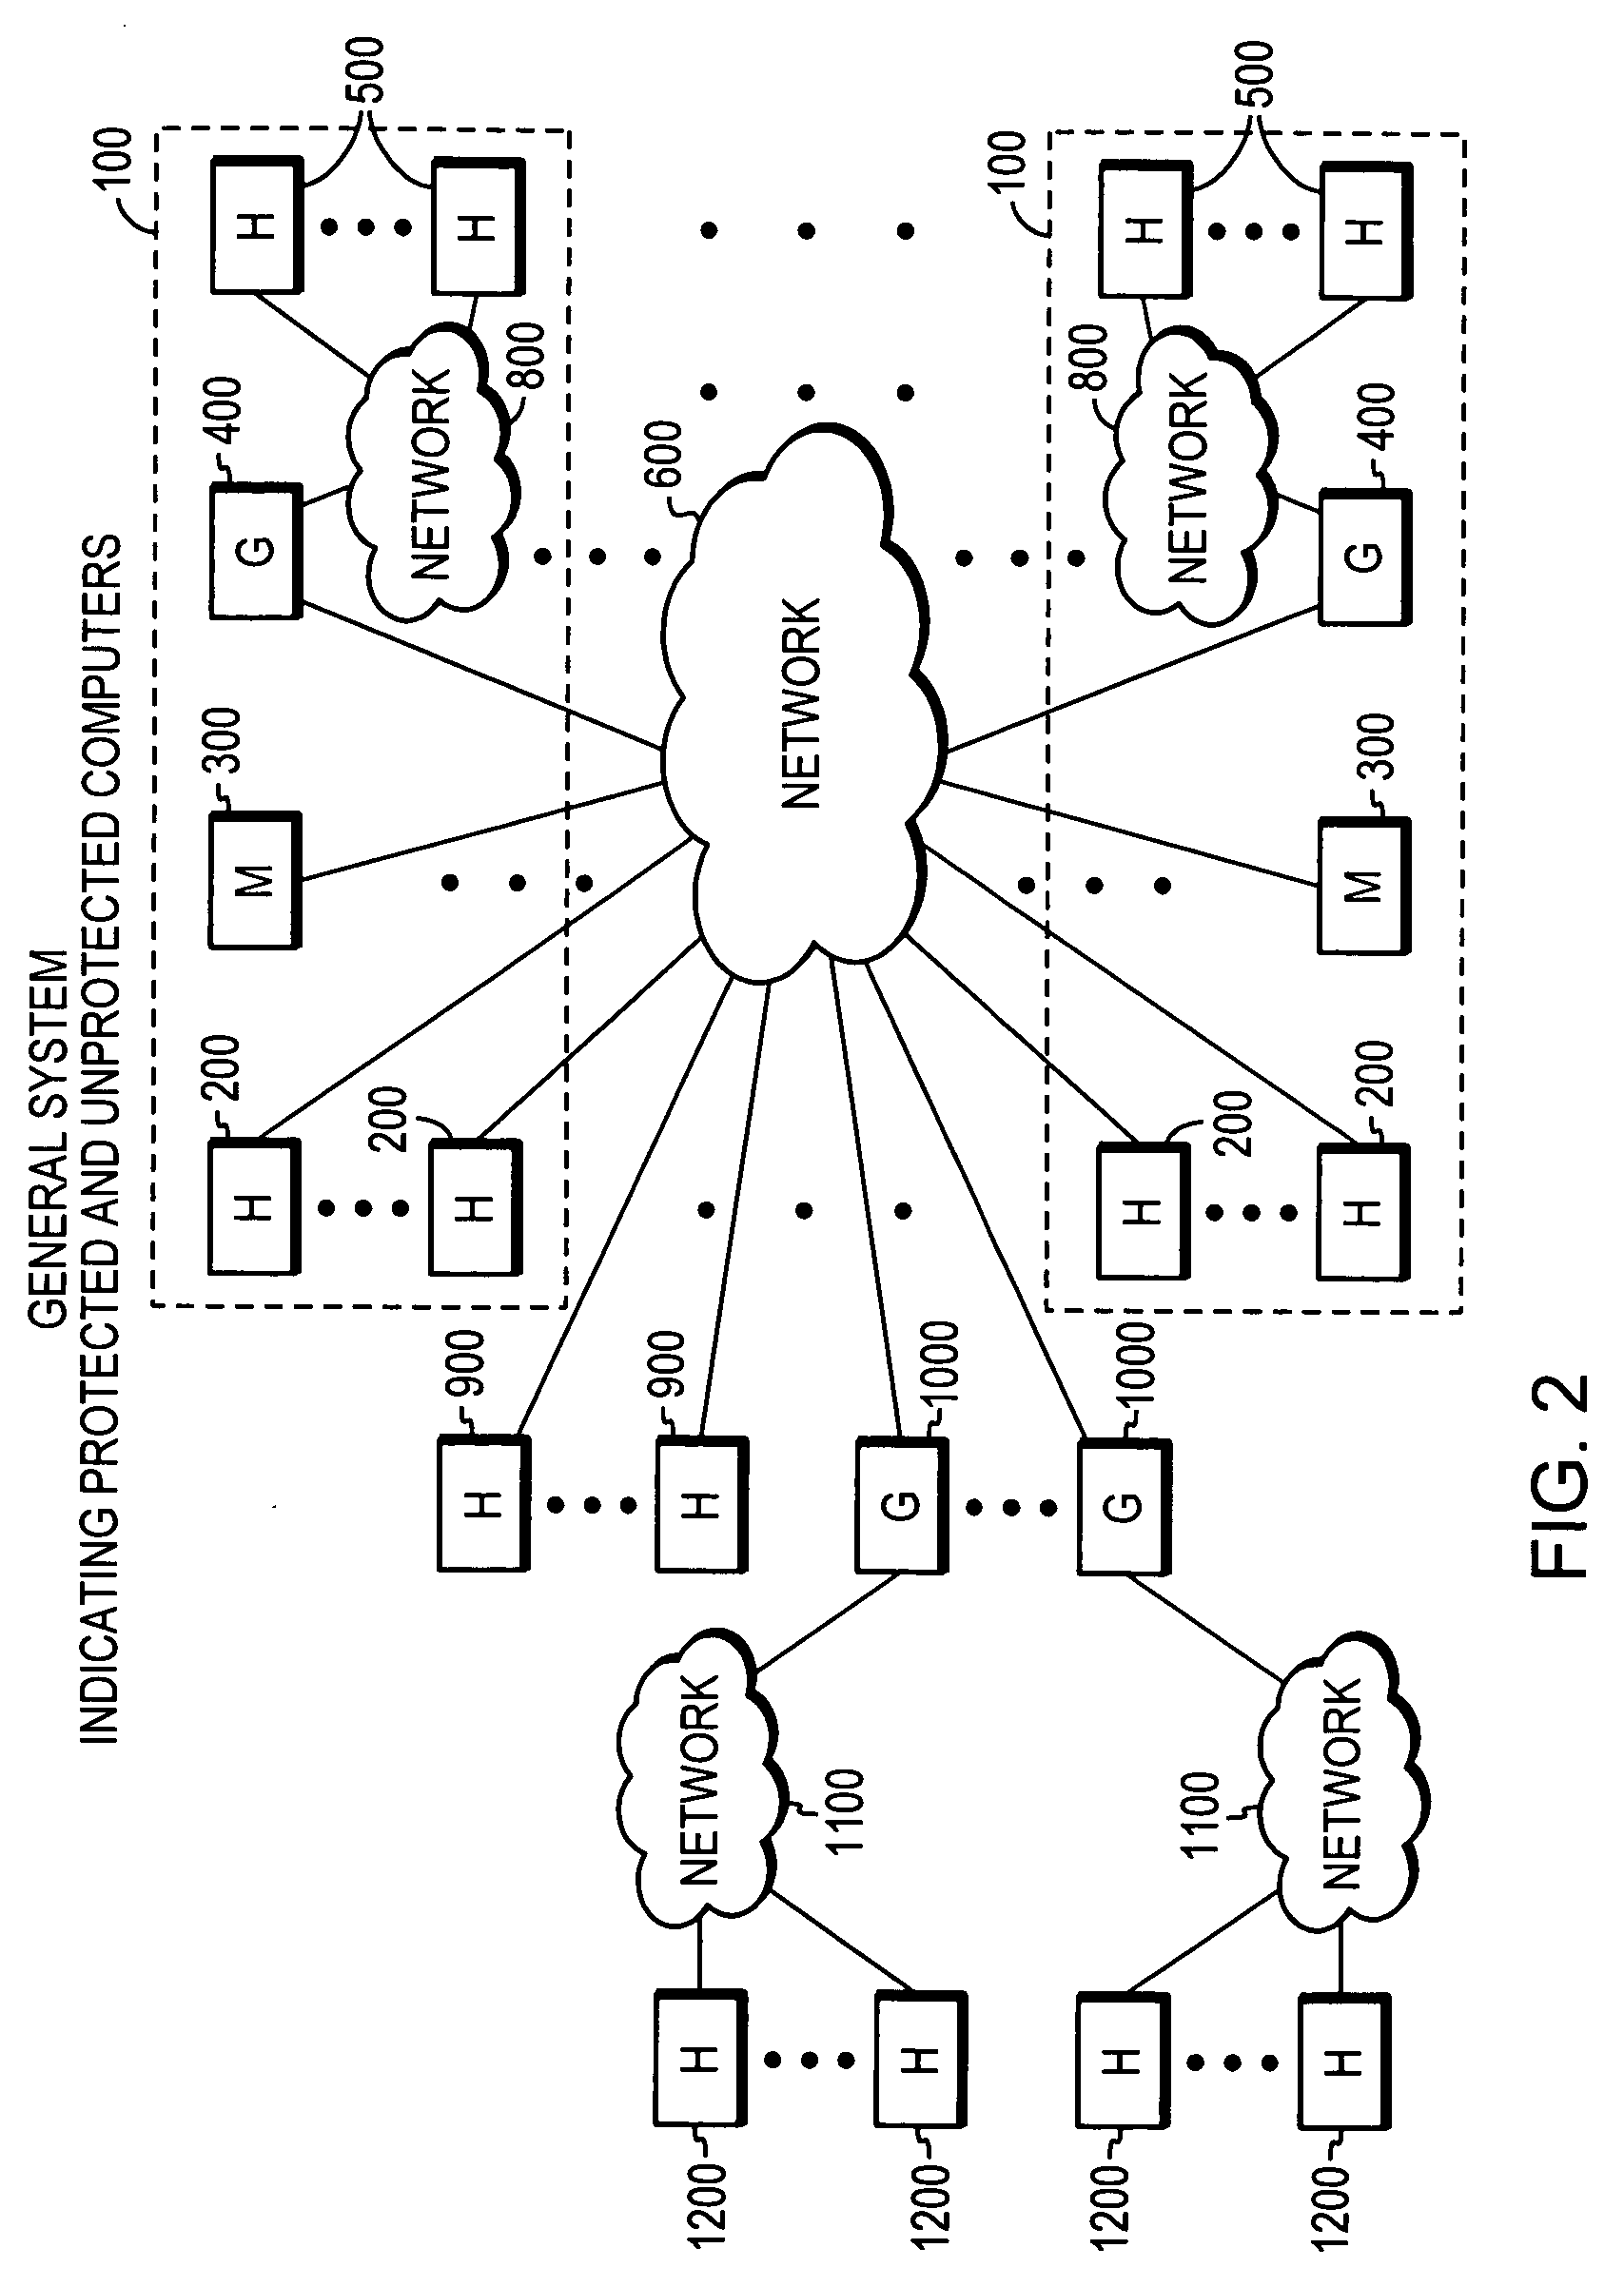 System, apparatuses, methods and computer-readable media for determining security status of computer before establishing network connection second group of embodiments-claim set I